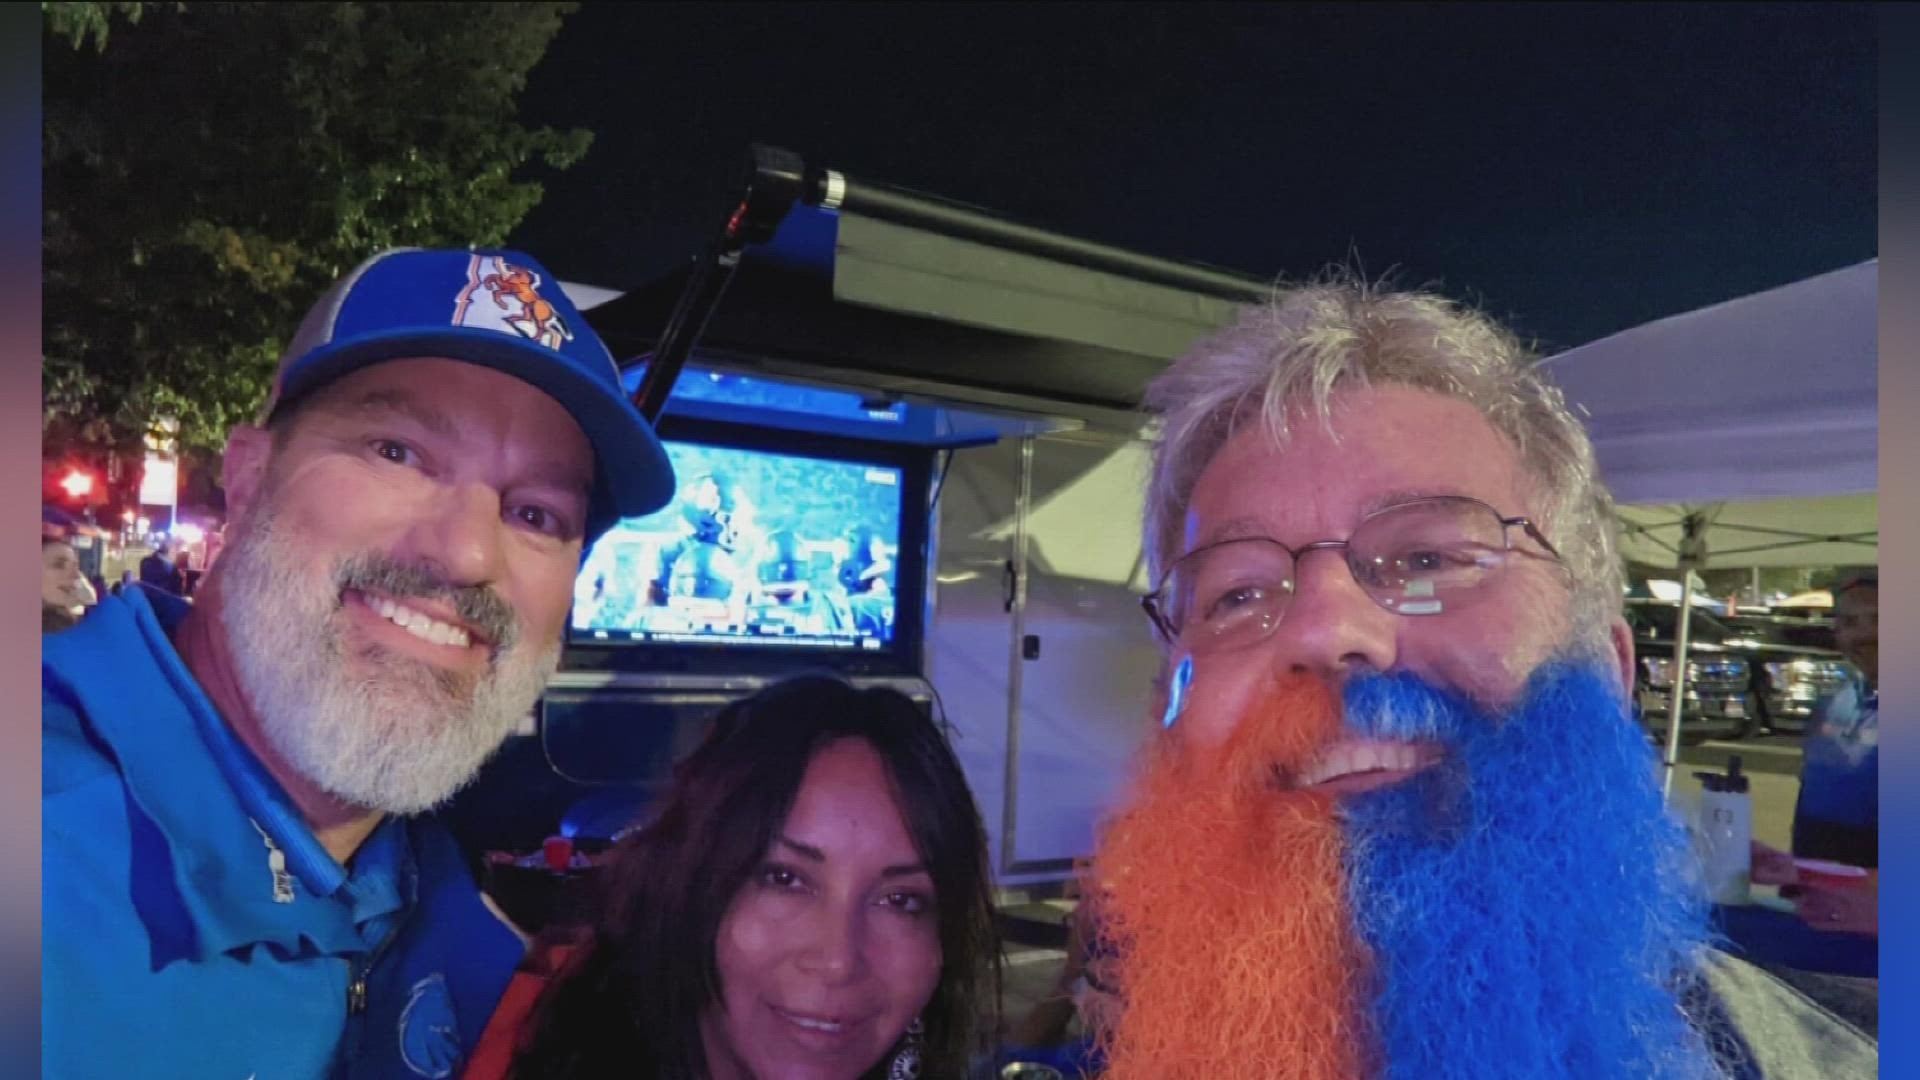 Wish Granters Board President Jim Paulson dyed his beard blue and orange, after the non-profit raised $500 in honor of World Beard Day.